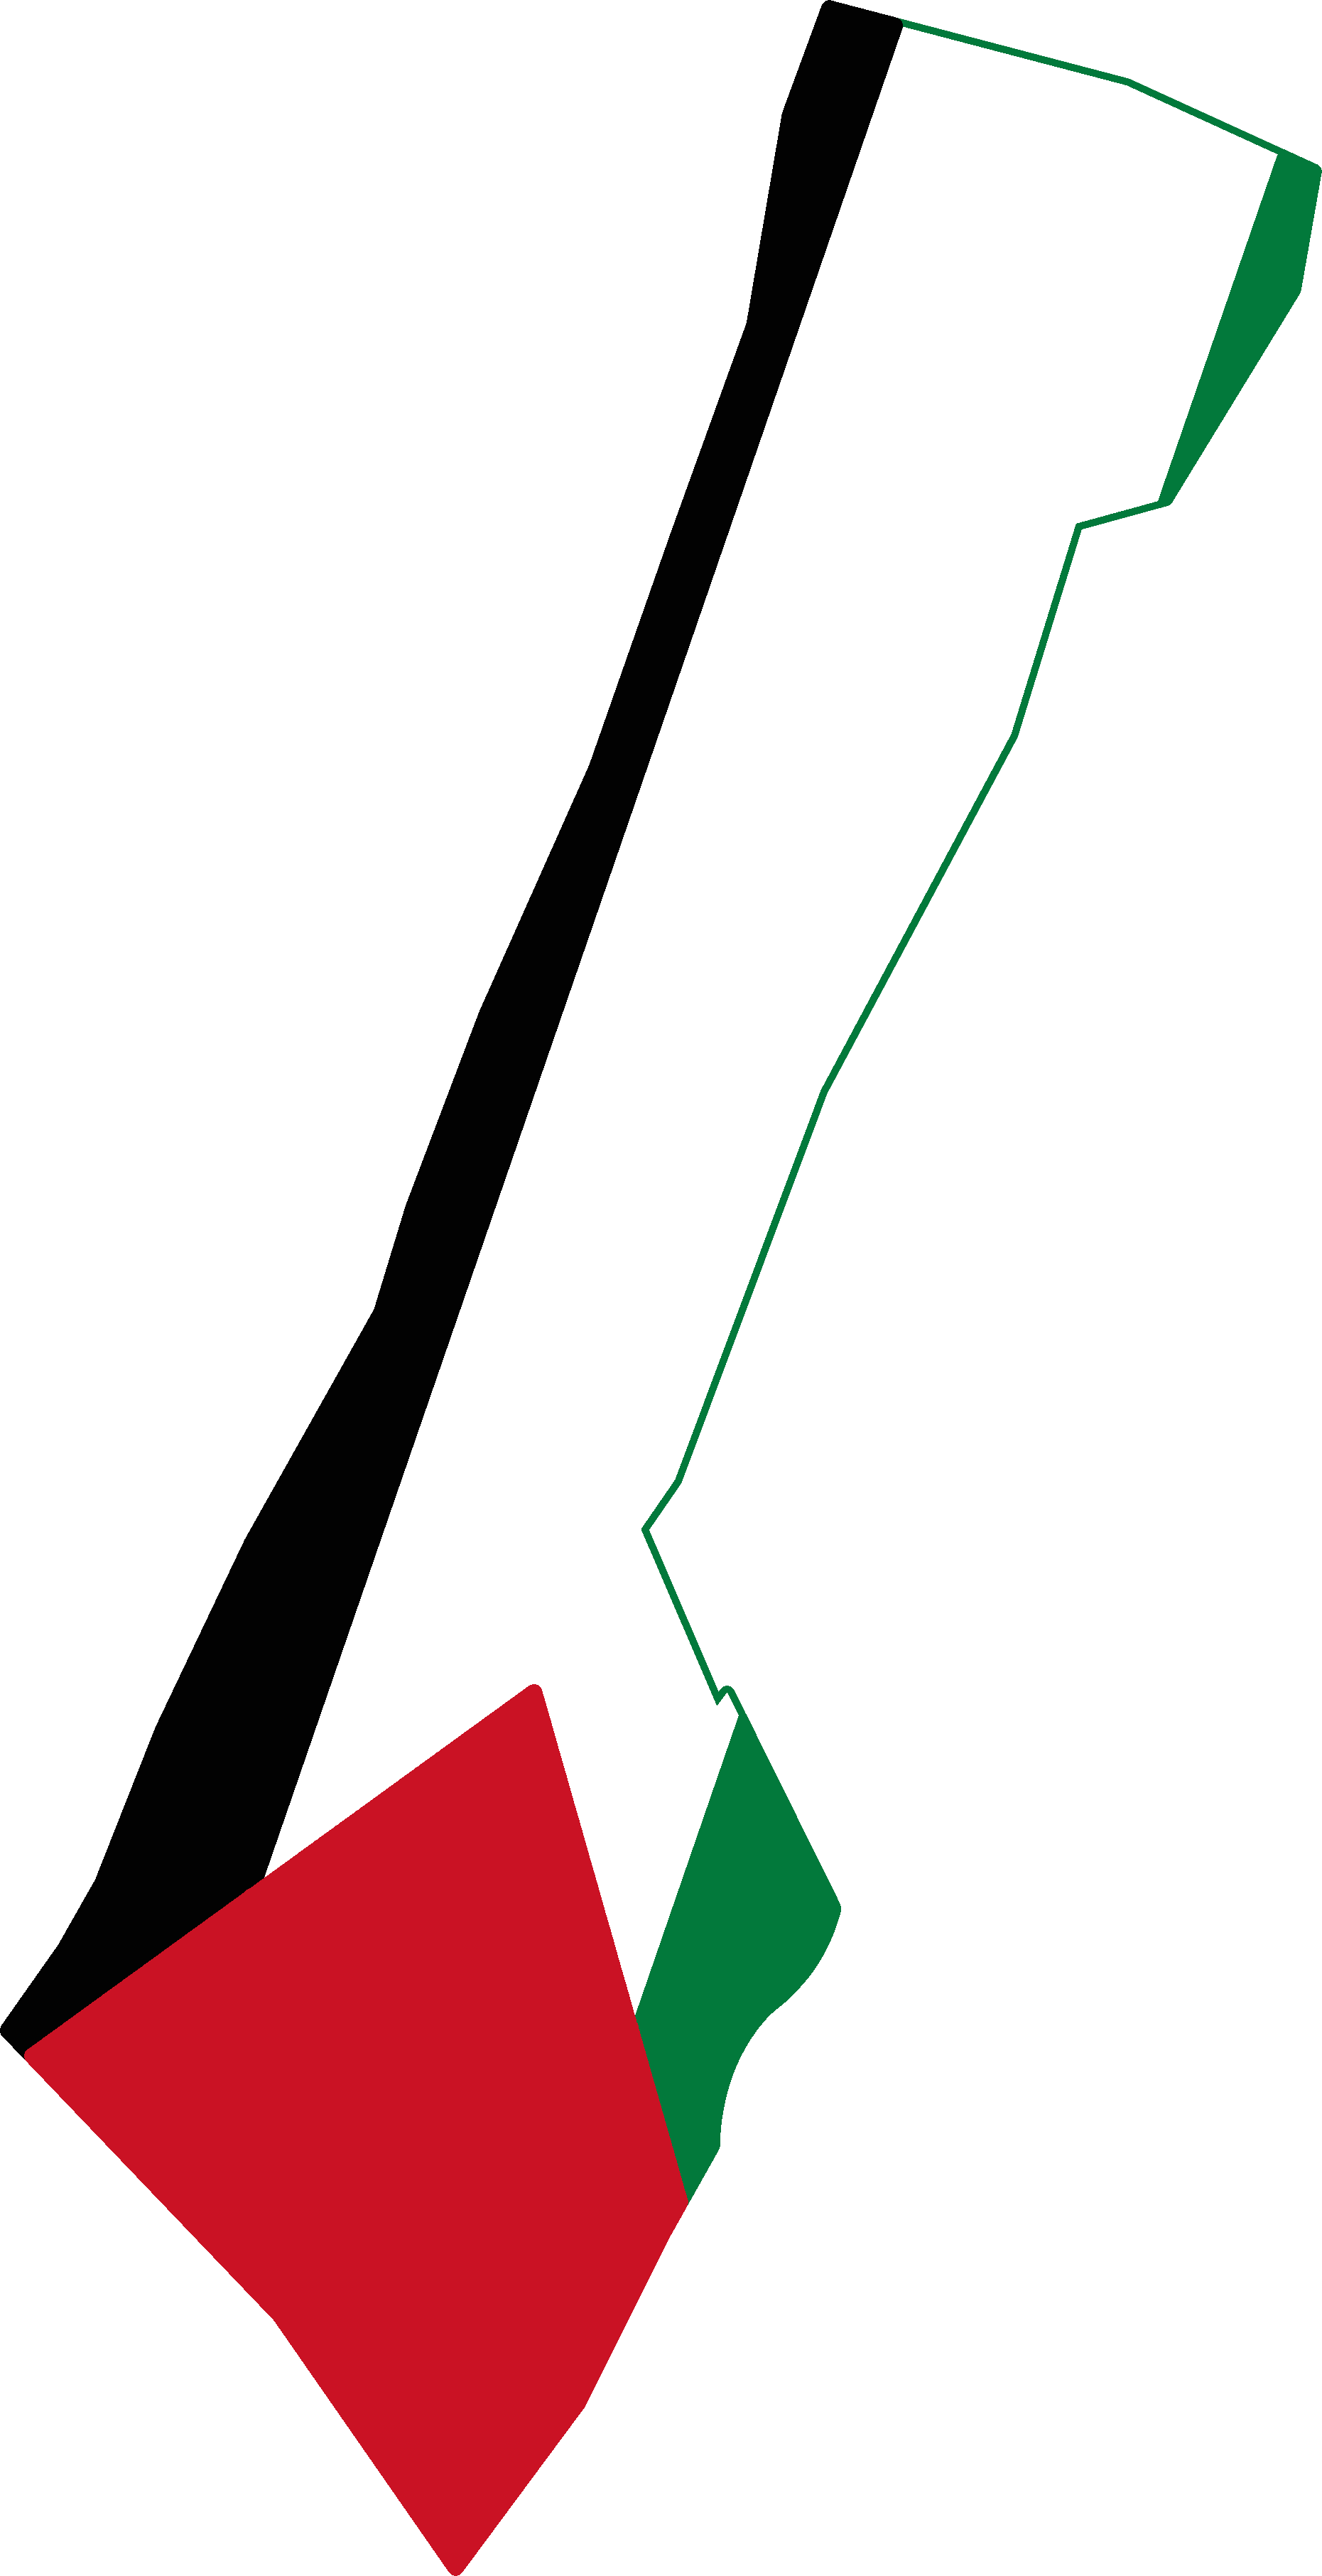 File:Flag map of Gaza Strip (Palestine).png - Wikimedia Commons